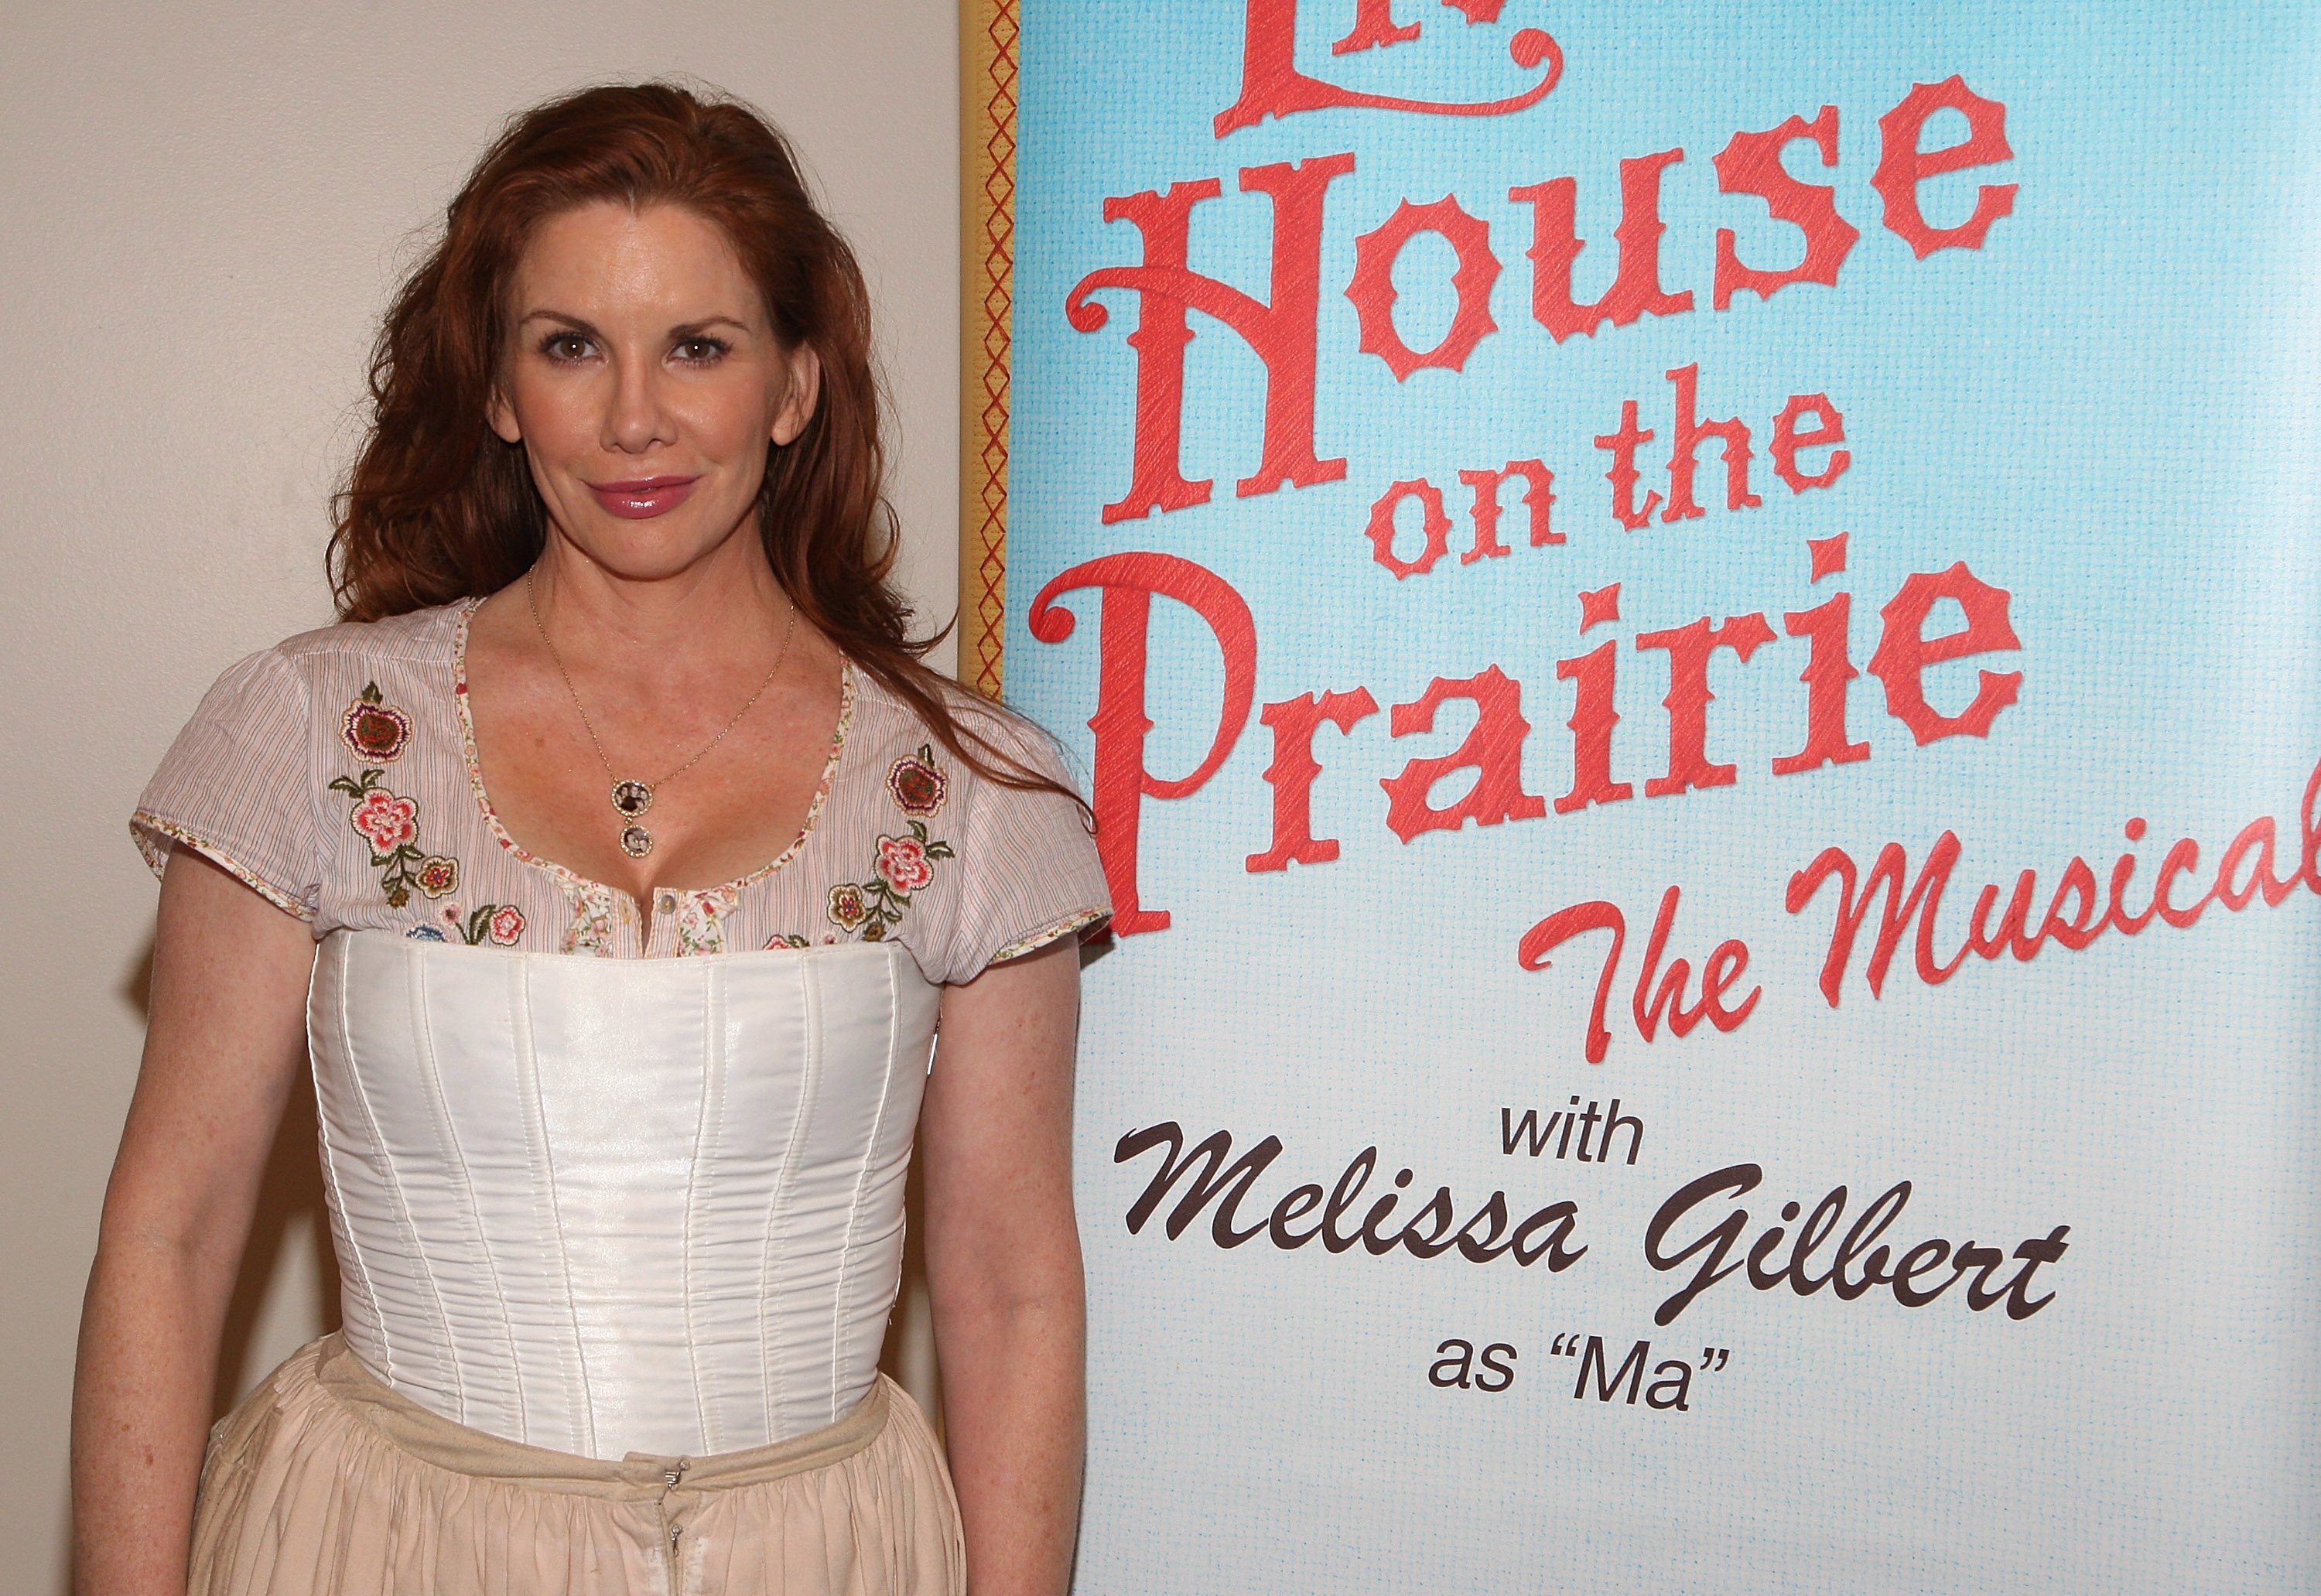 ‘Little House on the Prairie’:  Melissa Gilbert Once Said Breasts Couldn’t Be ‘Smaller Than a B Cup’ on the Show